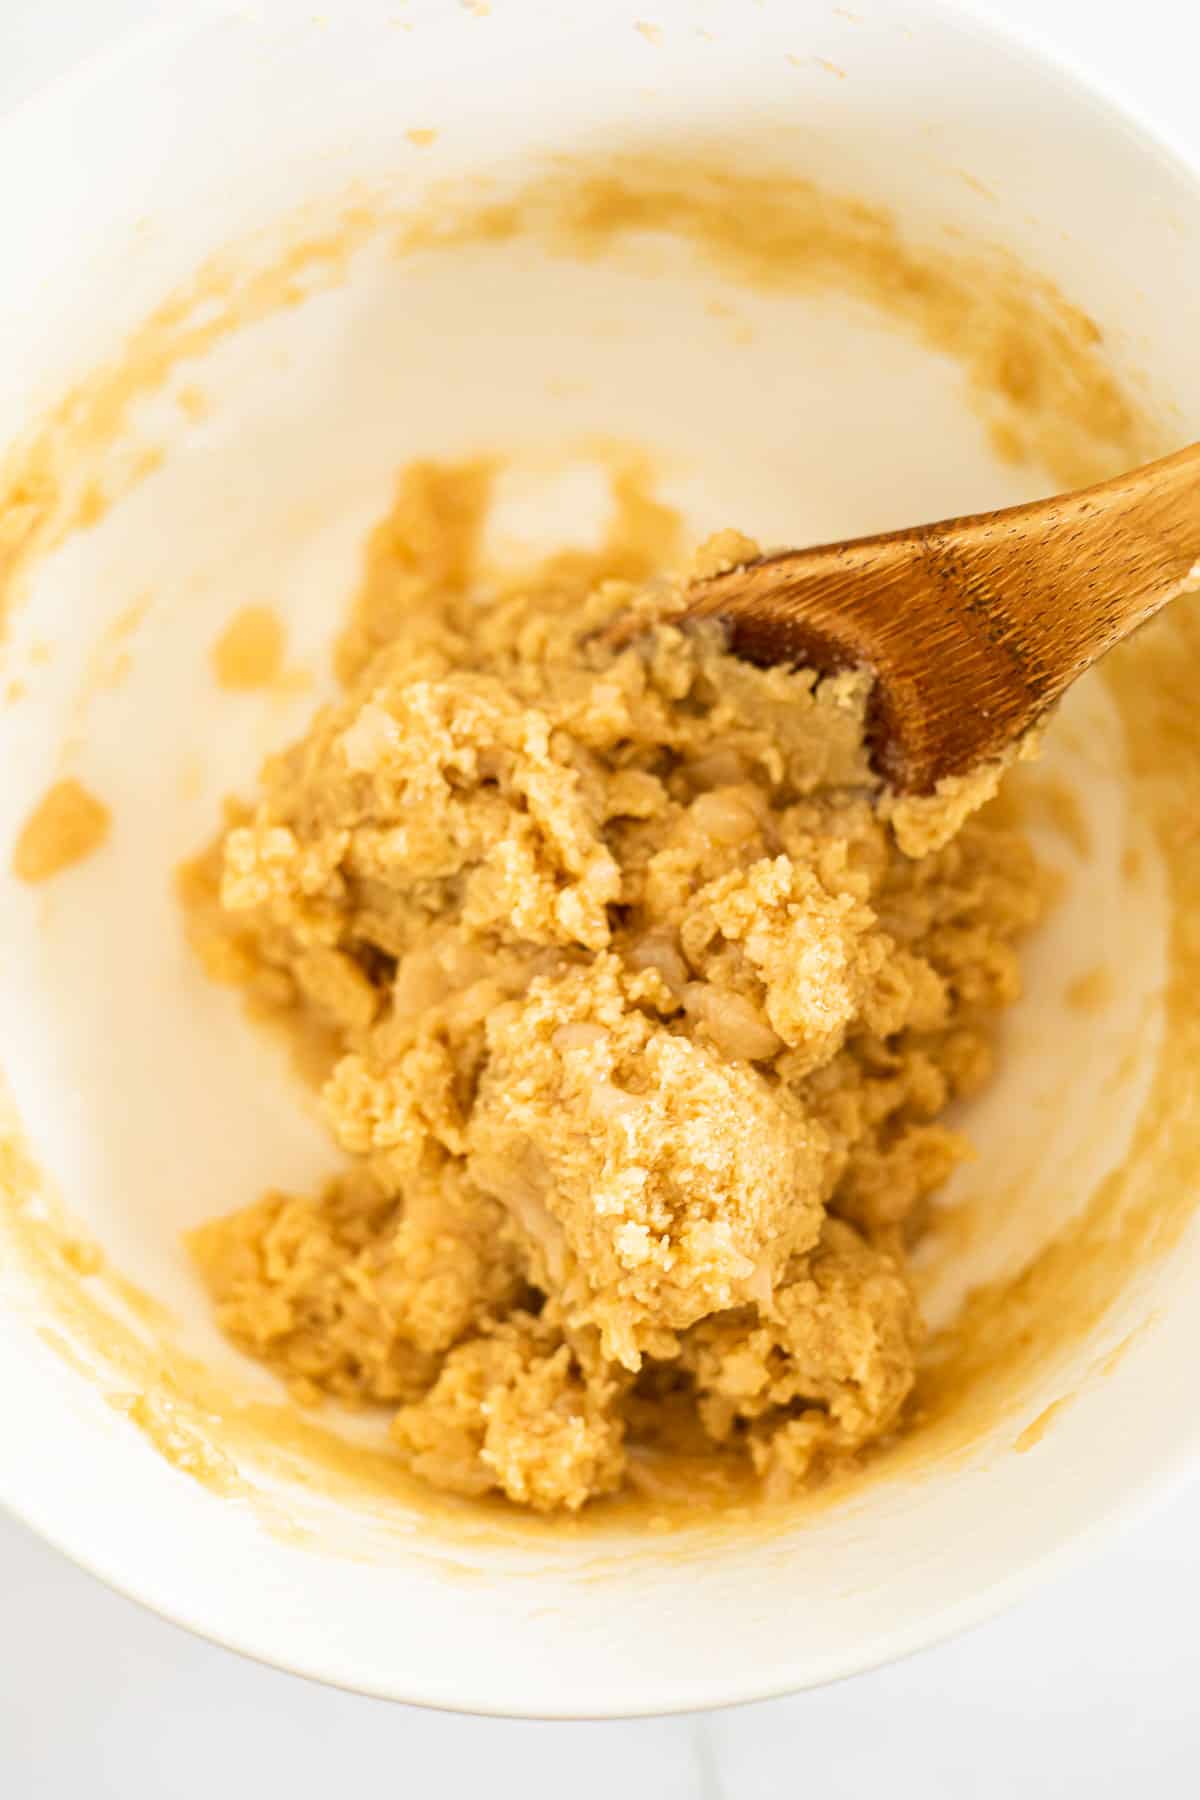 Applesauce, butter, and brown sugar mixed in a white bowl.